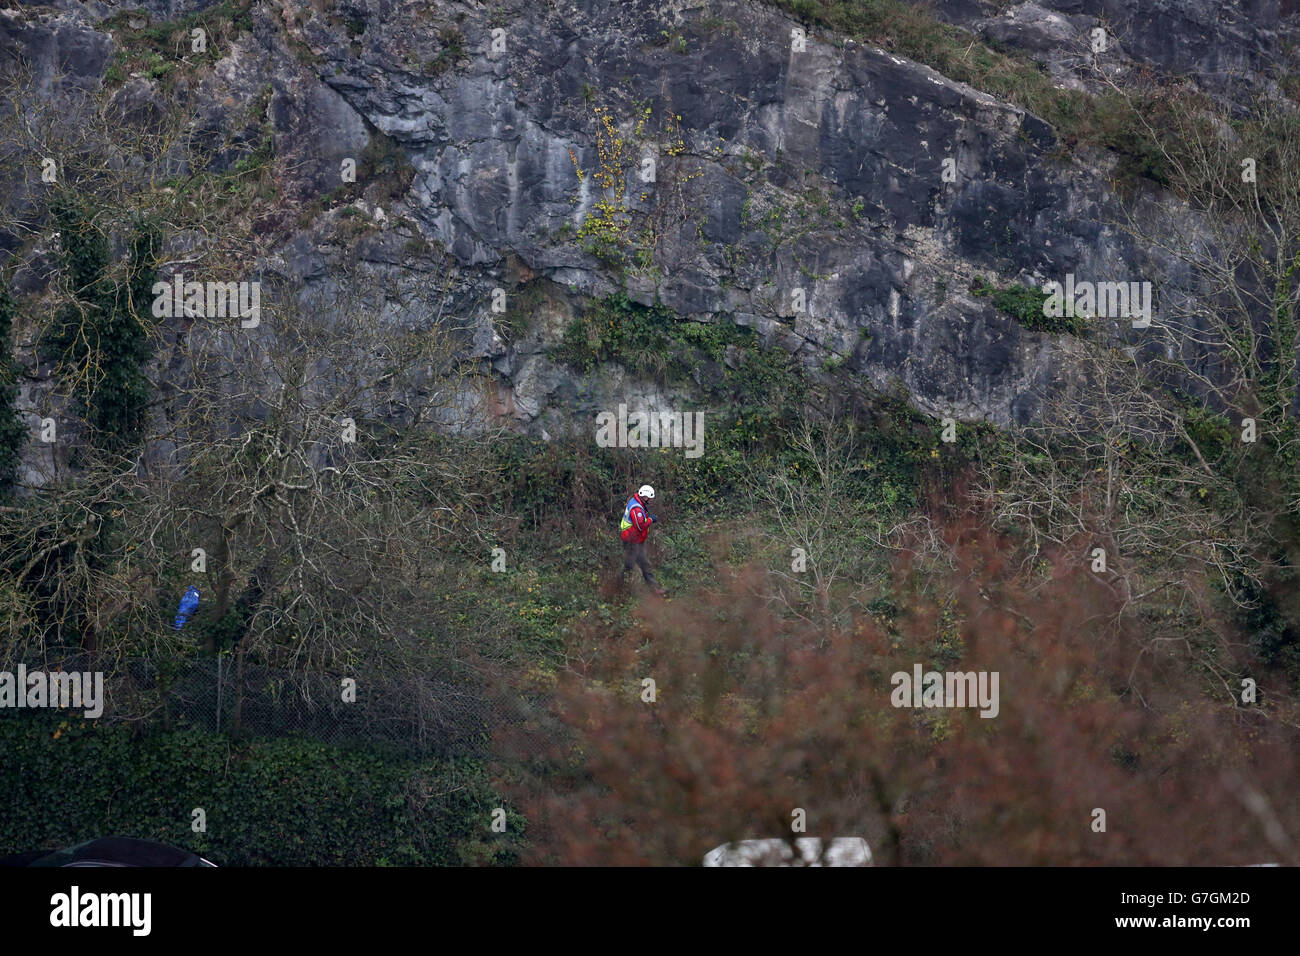 Avon and Somerset Police during the search at Avon Gorge for missing mother Charlotte Bevan and her newborn baby girl Zaani Tiana Bevan Malbrouck, where it has been announced that their bodies have been discovered. Stock Photo